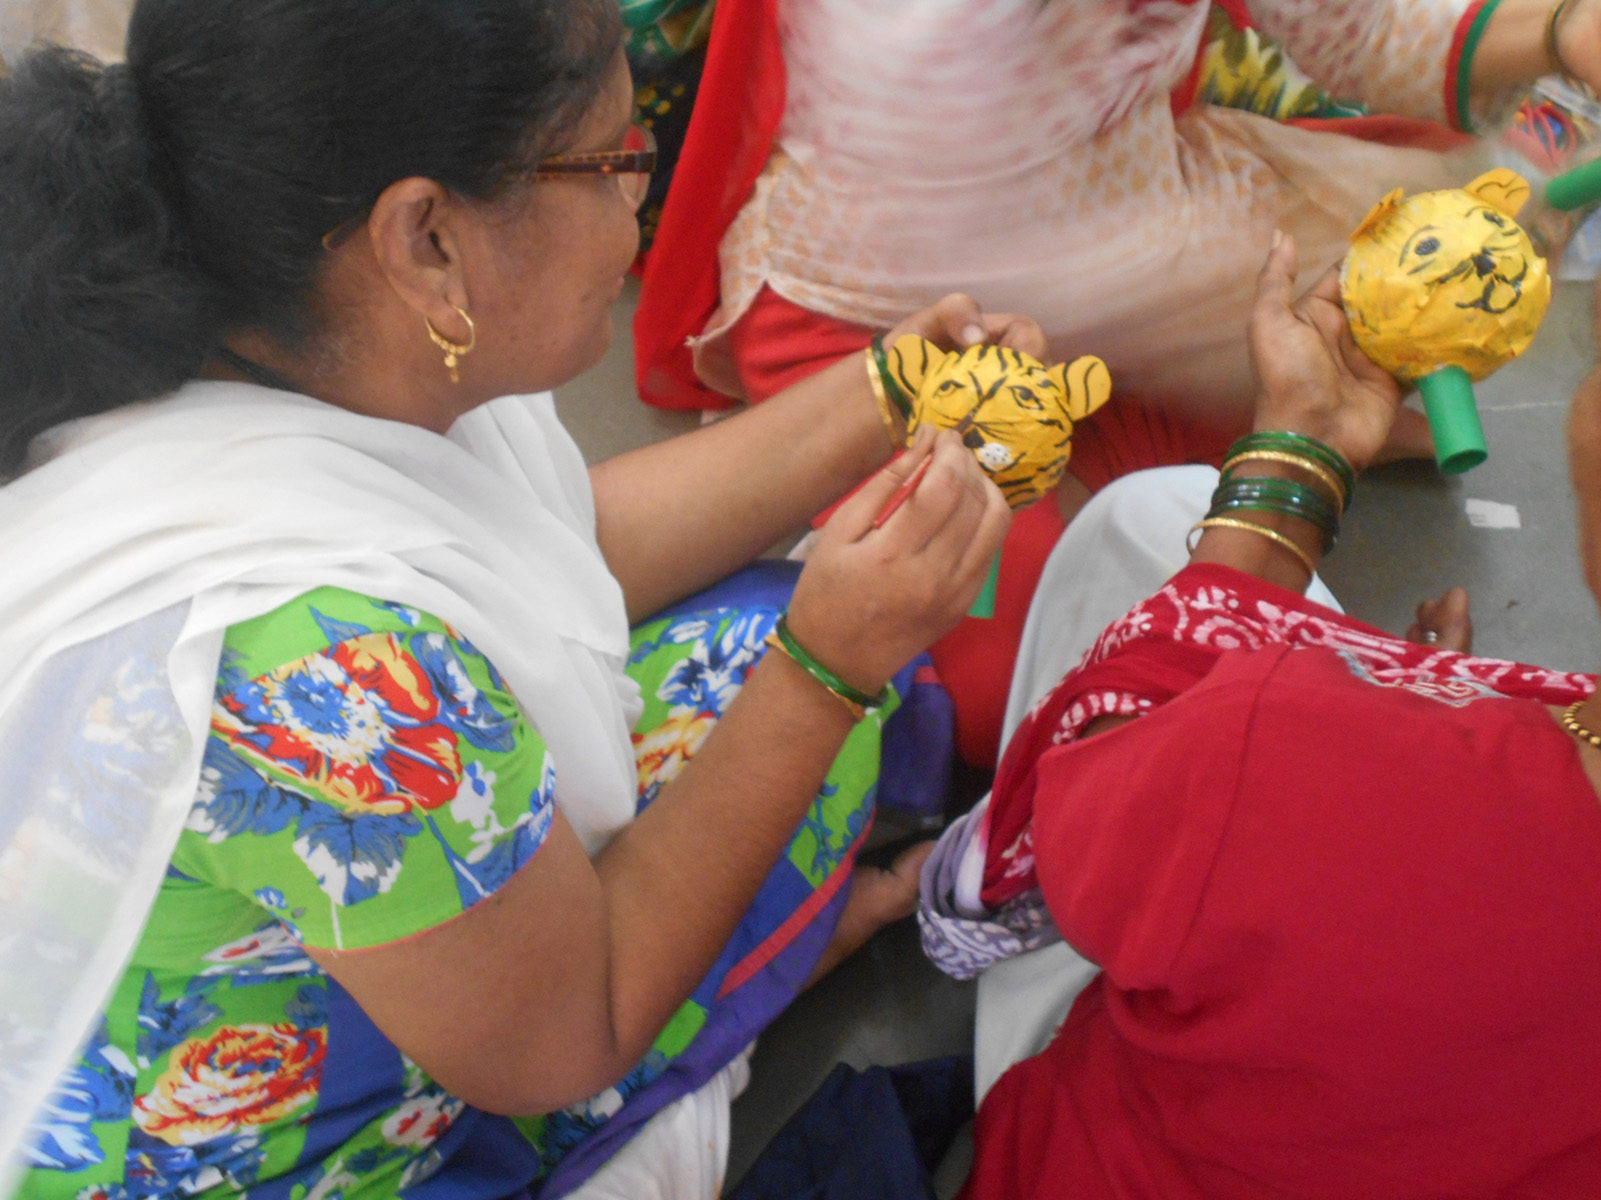 Women busy coloring a puppet
